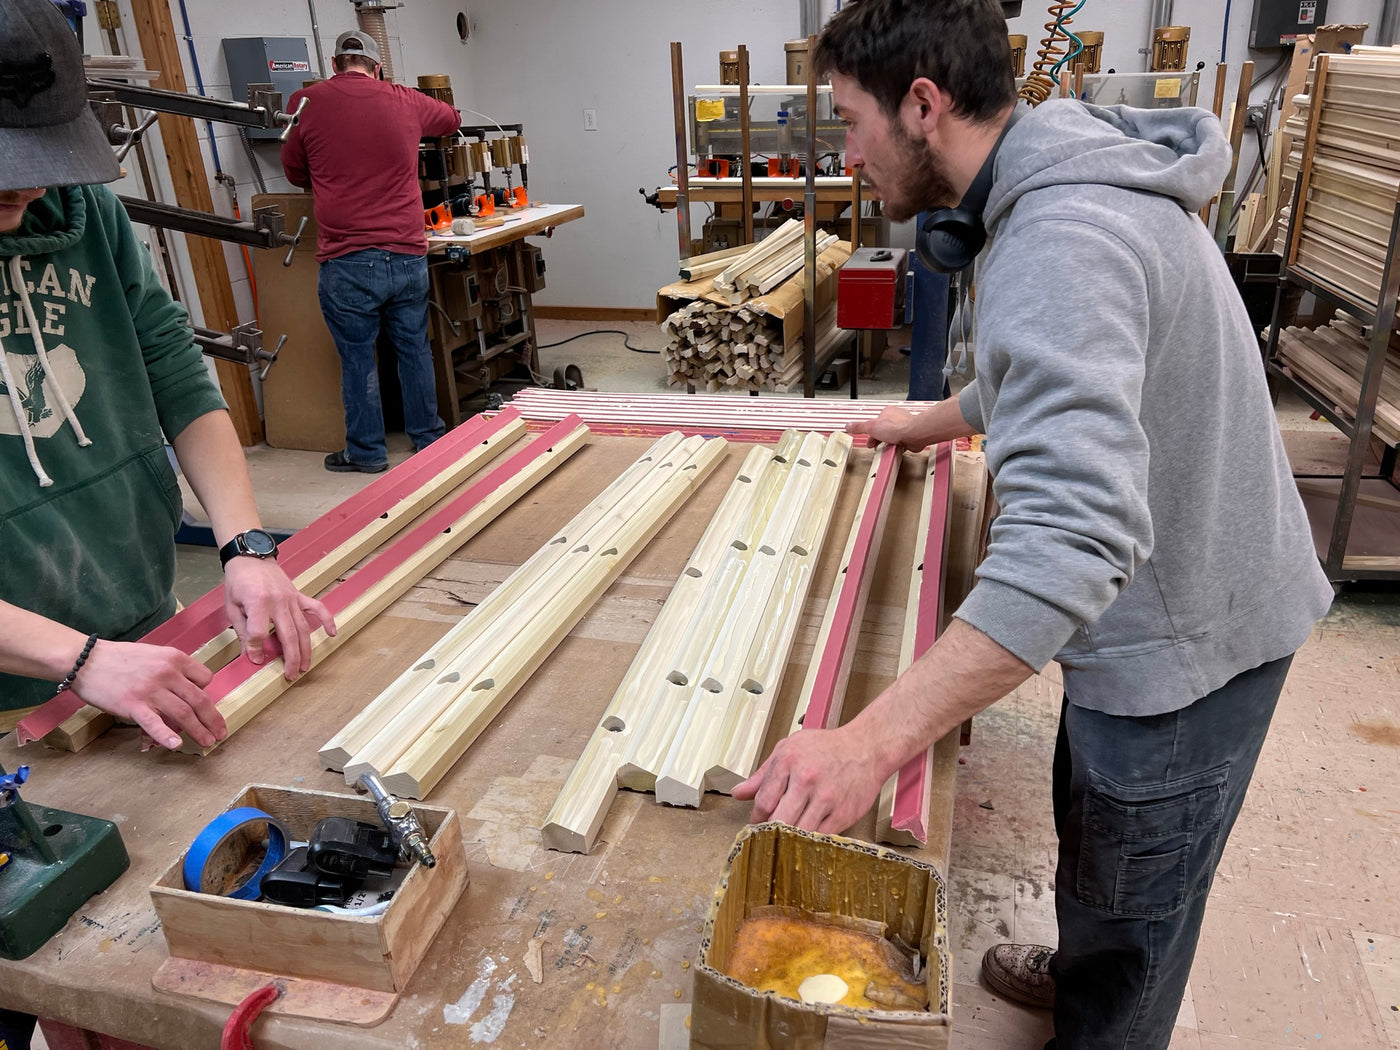 Two team members align and glue rubber to the solid wood rail blanks